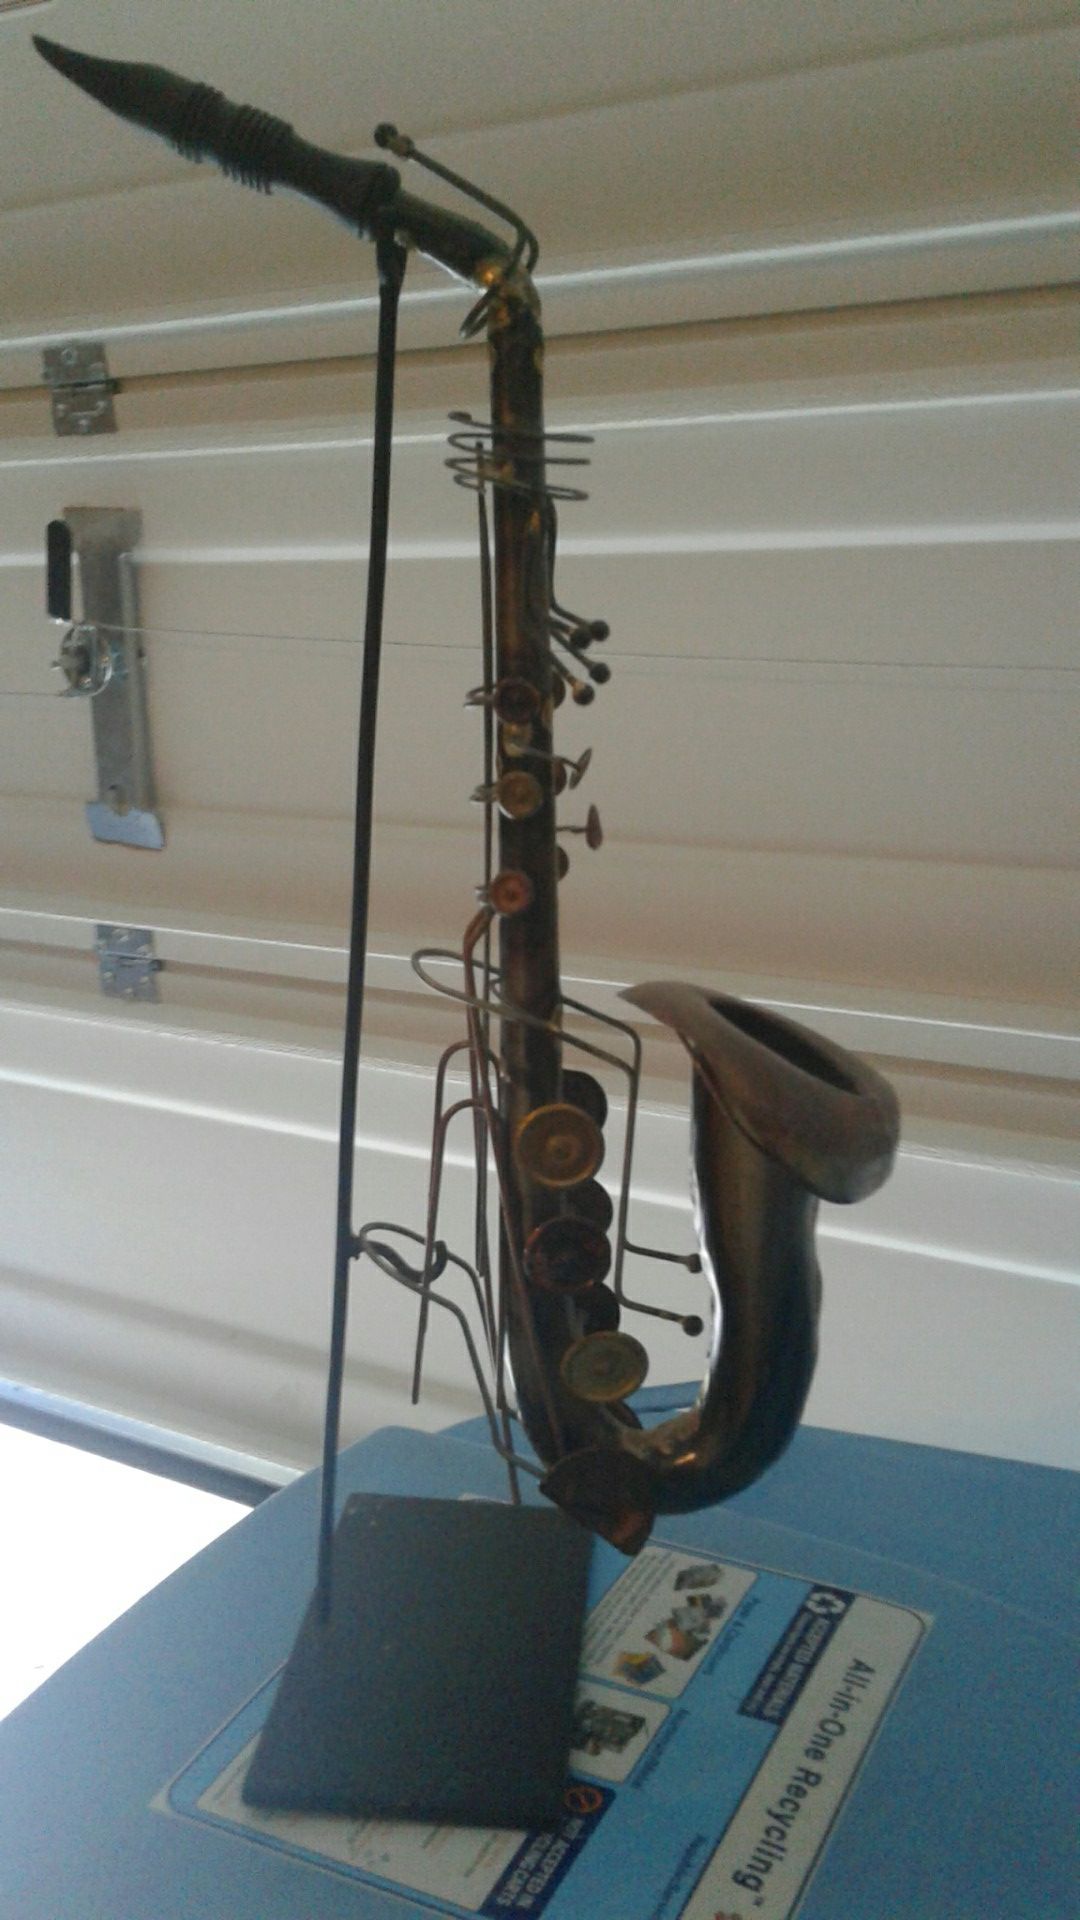 Pier 1 trumpet and saxophone $15